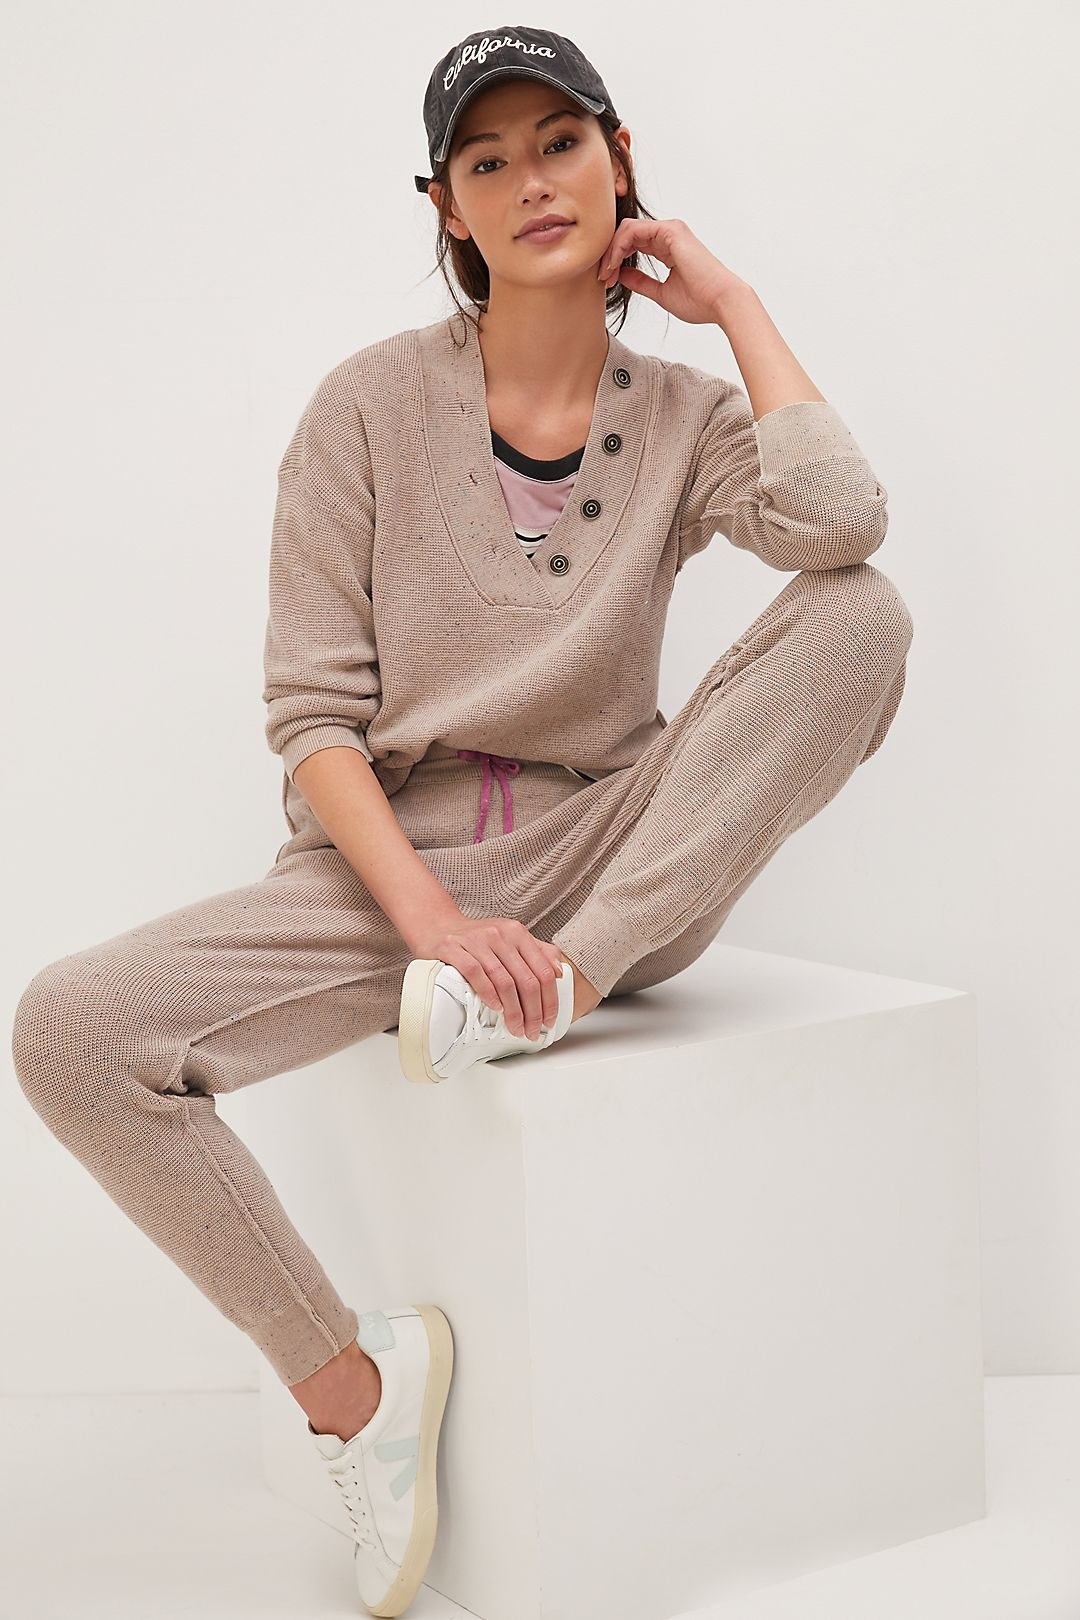 model wearing oatmeal colored knit loungewear set, and baseball had and sneakers